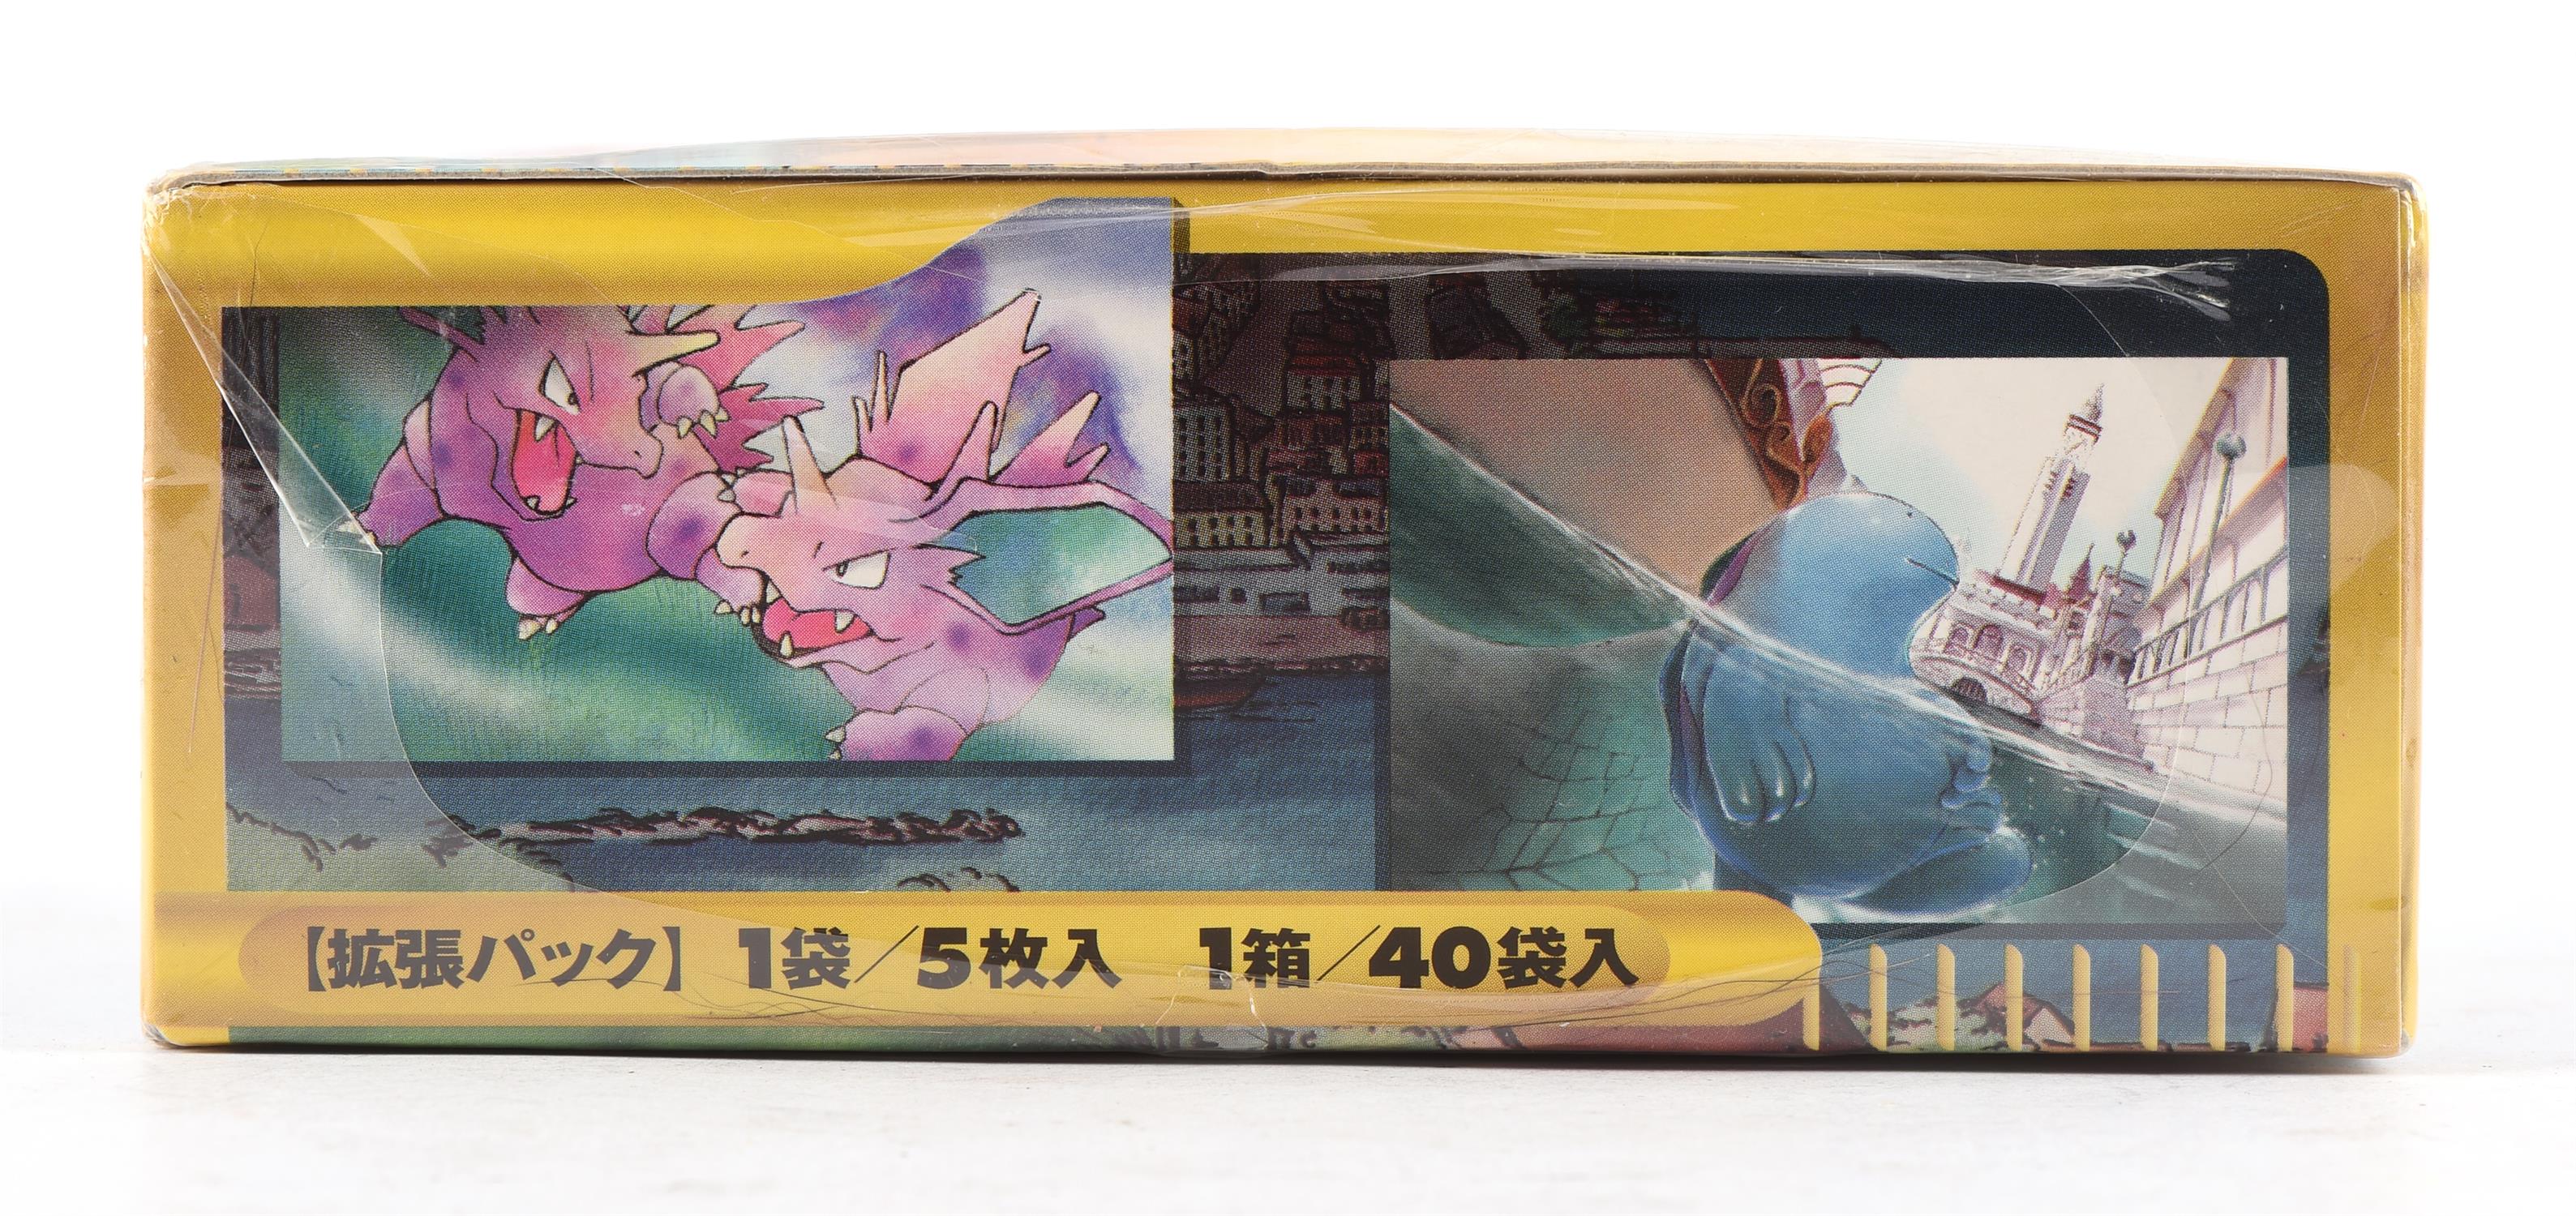 Pokemon TCG. Japanese Town On No Map (Aquapolis), 2002 first edition e-series sealed booster box of - Image 4 of 7